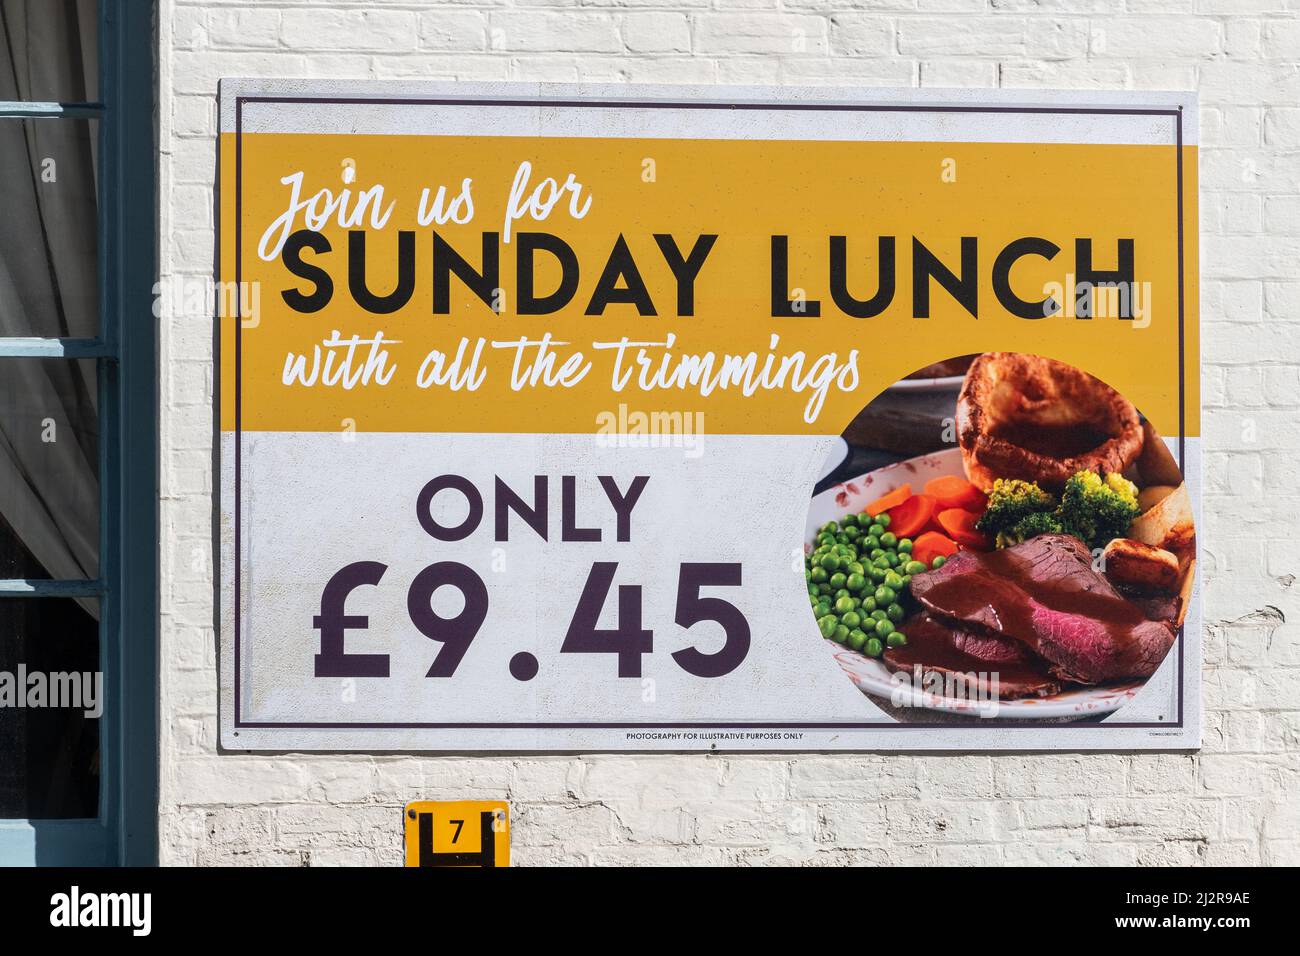 Sunday Lunch advertisement outside pub restaurant, Berkshire, England, UK, Sunday lunch with all the trimmings for £9.45 set price Stock Photo